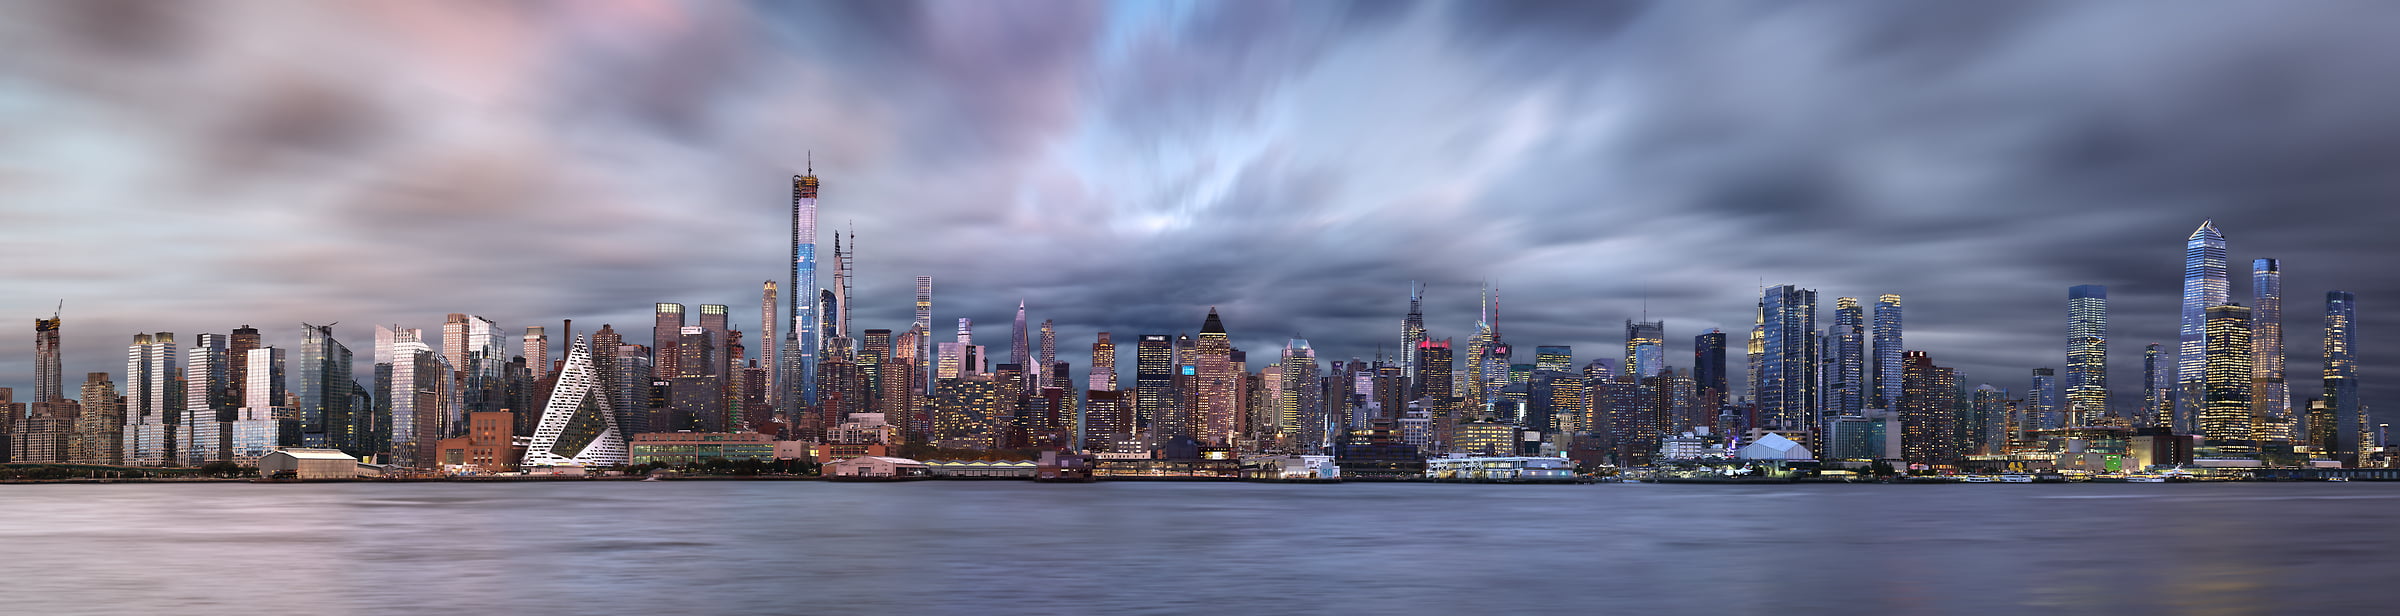 1,160 megapixels! A very high resolution, large-format VAST photo print of the New York City skyline that can be used as a wallpaper; photograph created by Phil Crawshay in Weehawken, New Jersey